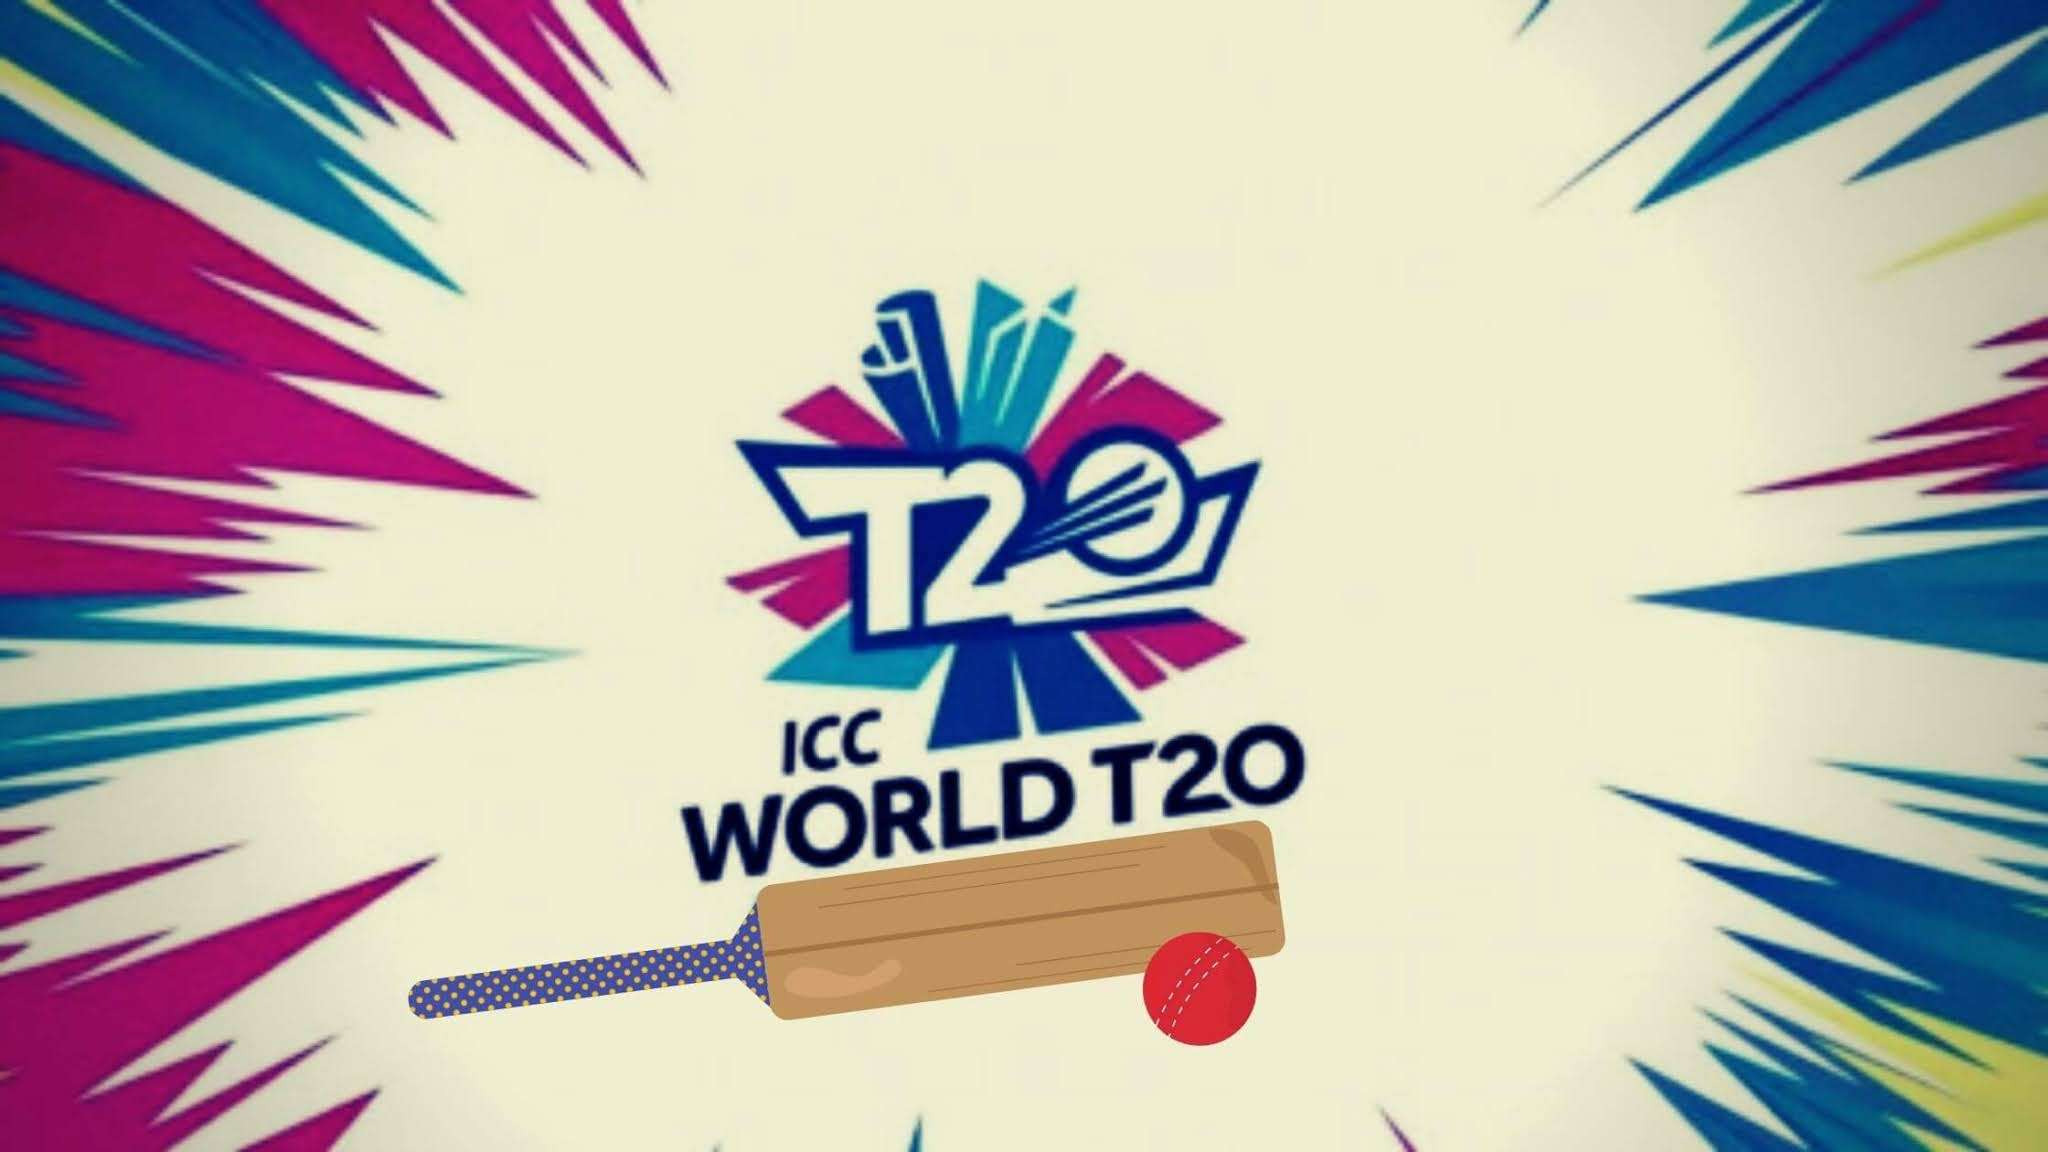 Cup world 2021 t20 2021 ICC